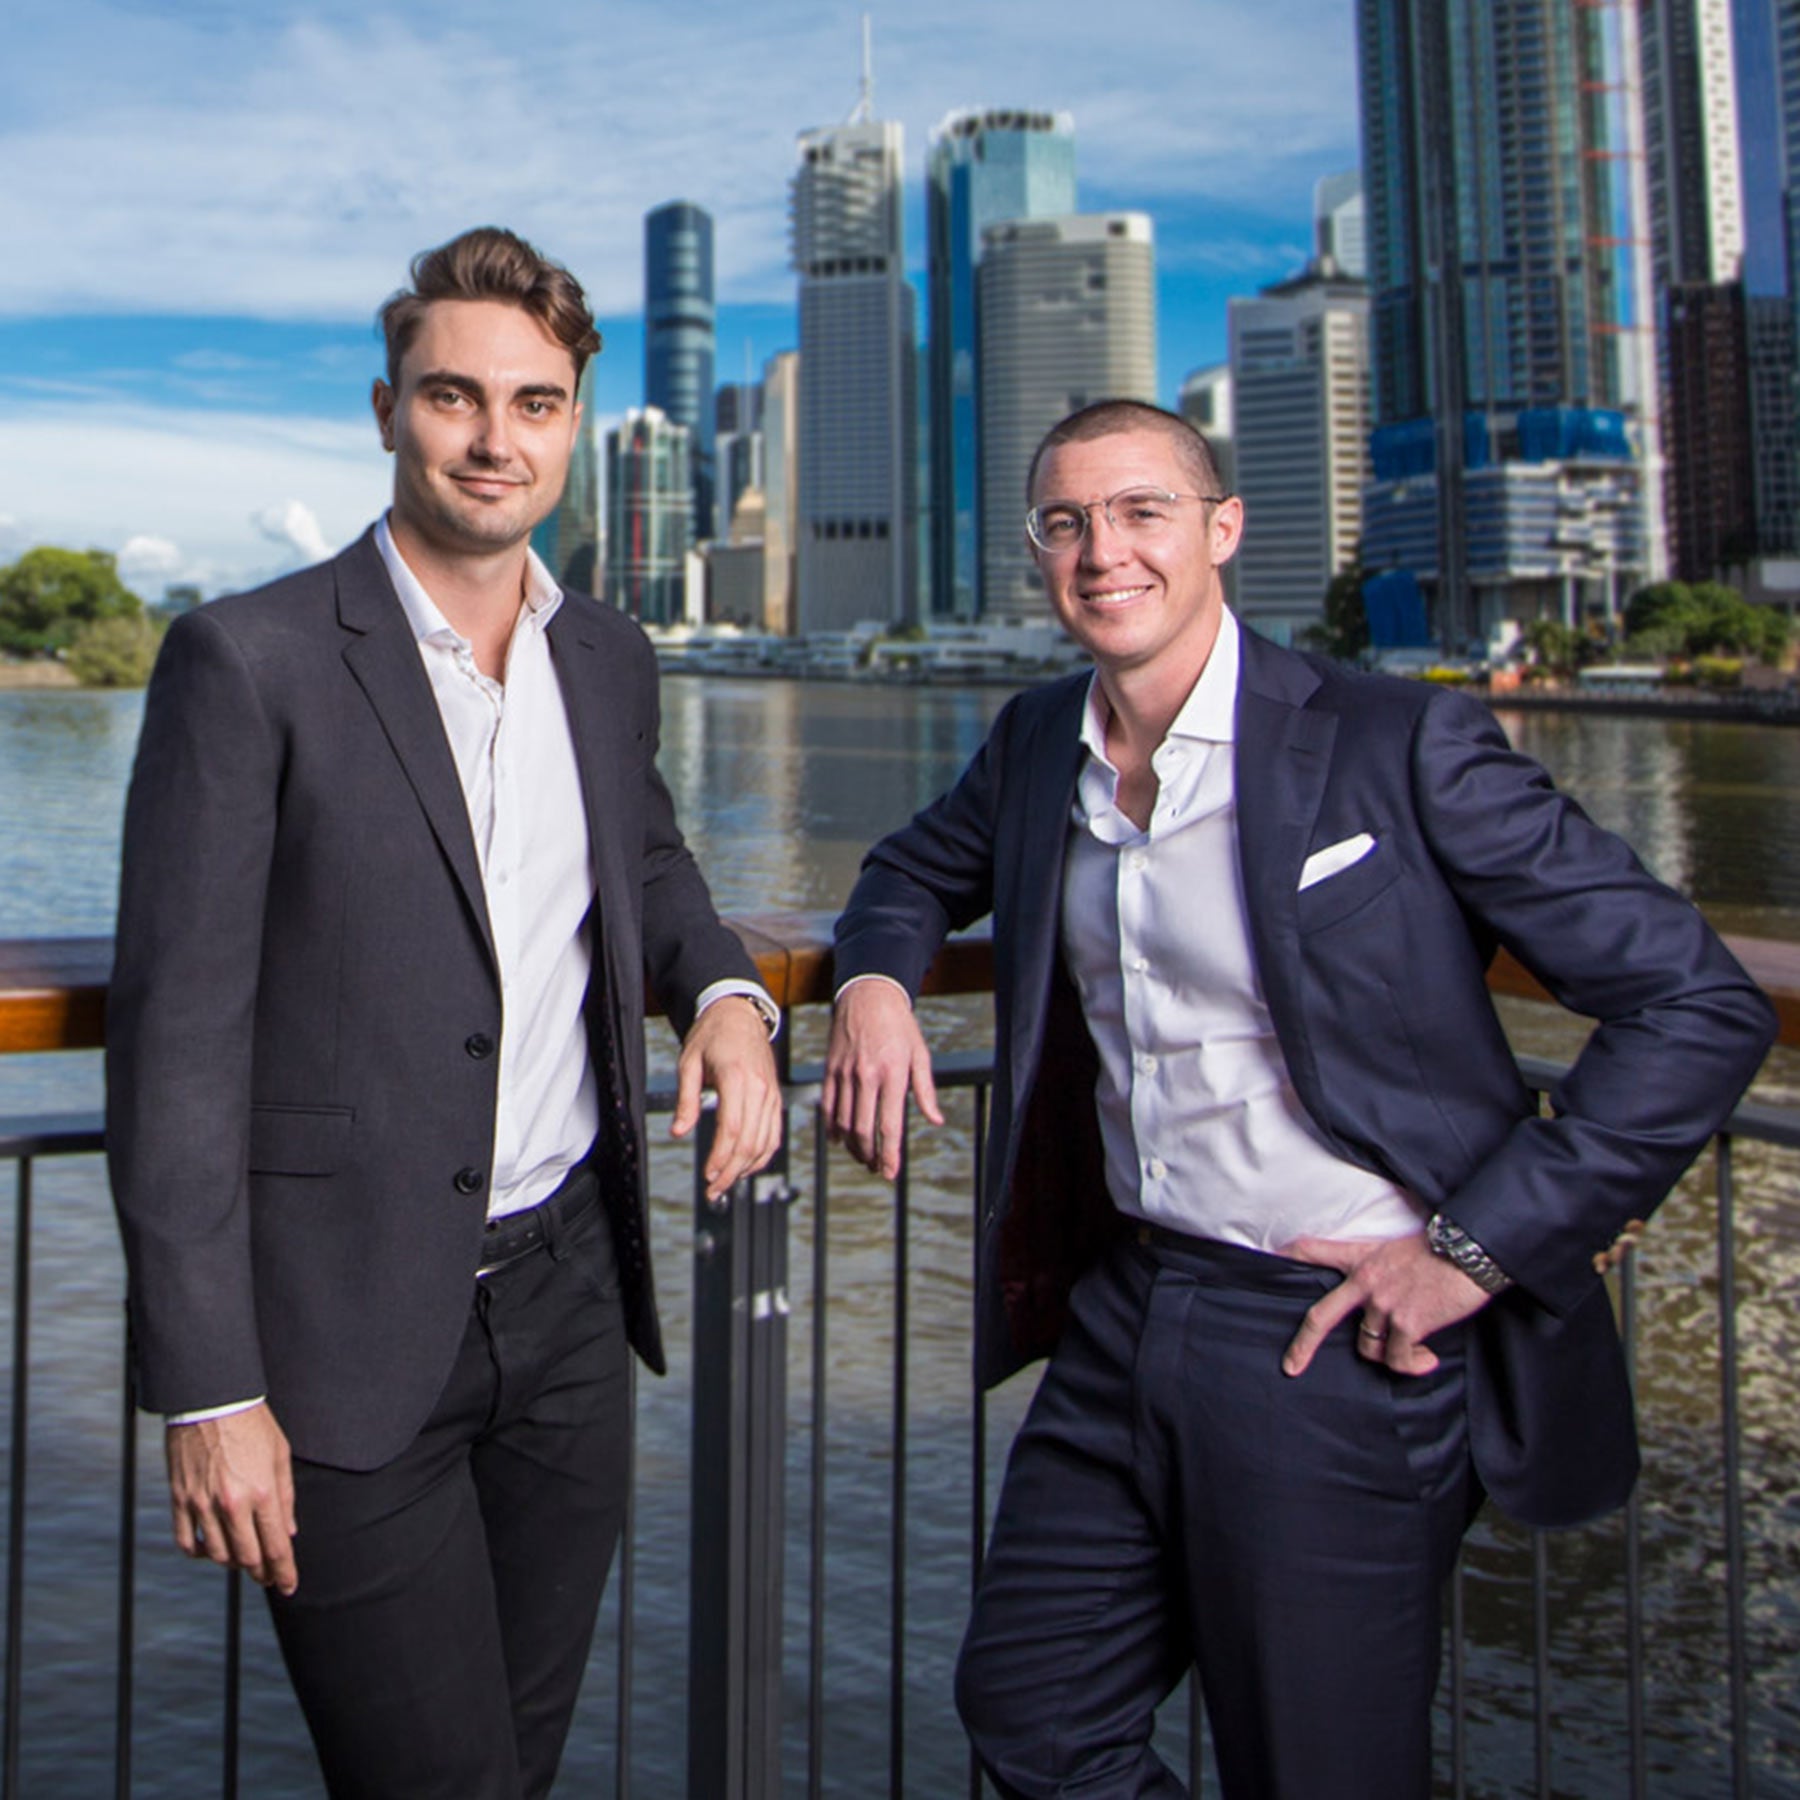 Audeara founders, Alex Afflick and Dr. James Fielding standing together with the Brisbane River and cityscape in the background